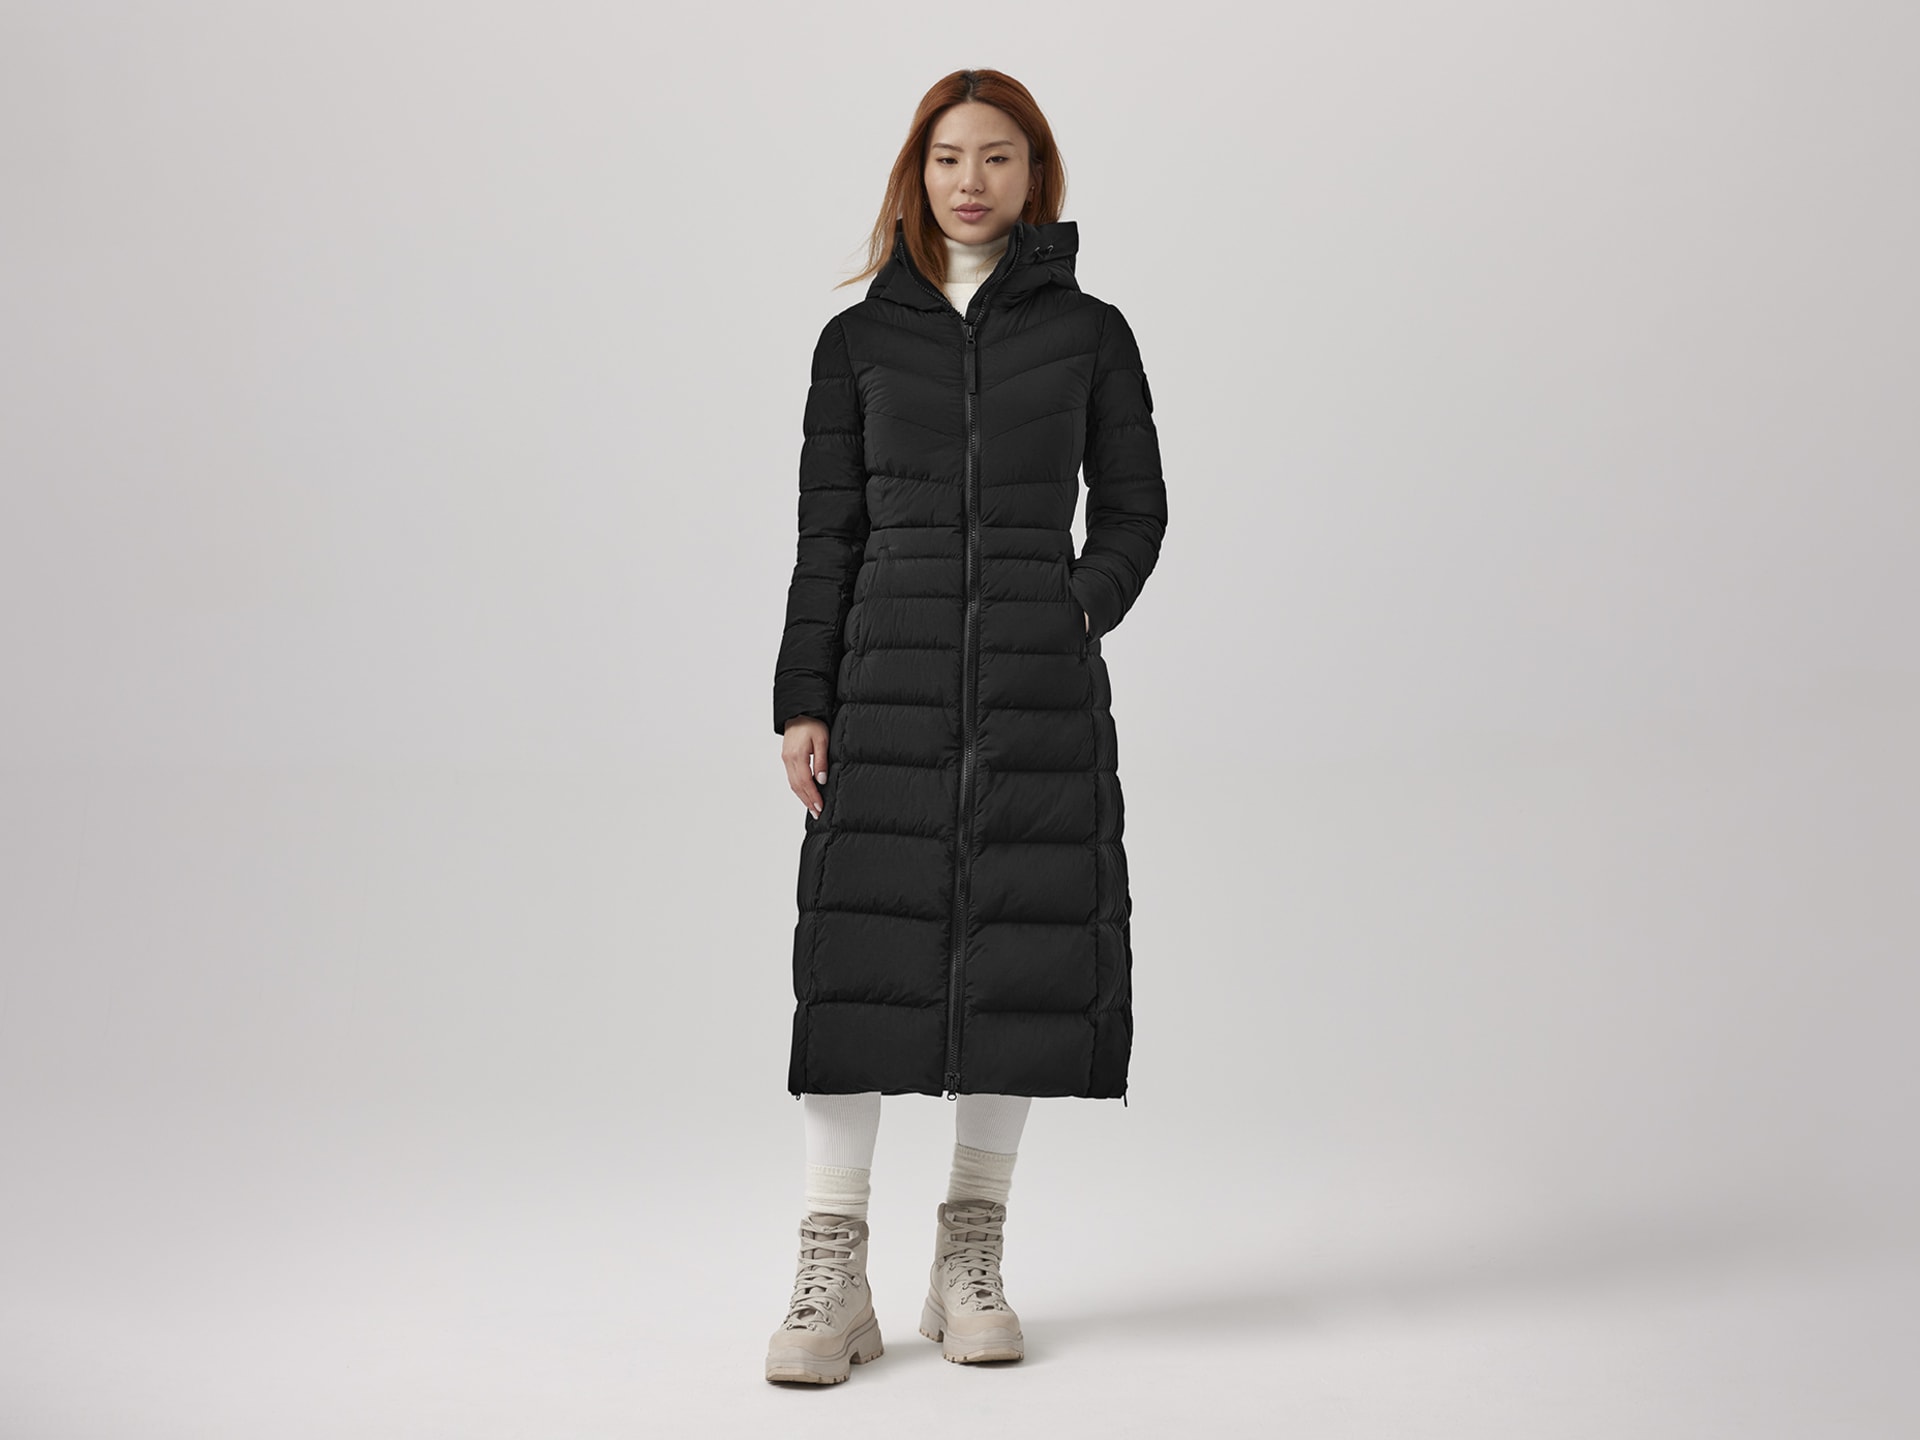 Unlock Wilderness' choice in the Burberry Vs Canada Goose comparison, the Clair Long Coat Black Label by Canada Goose